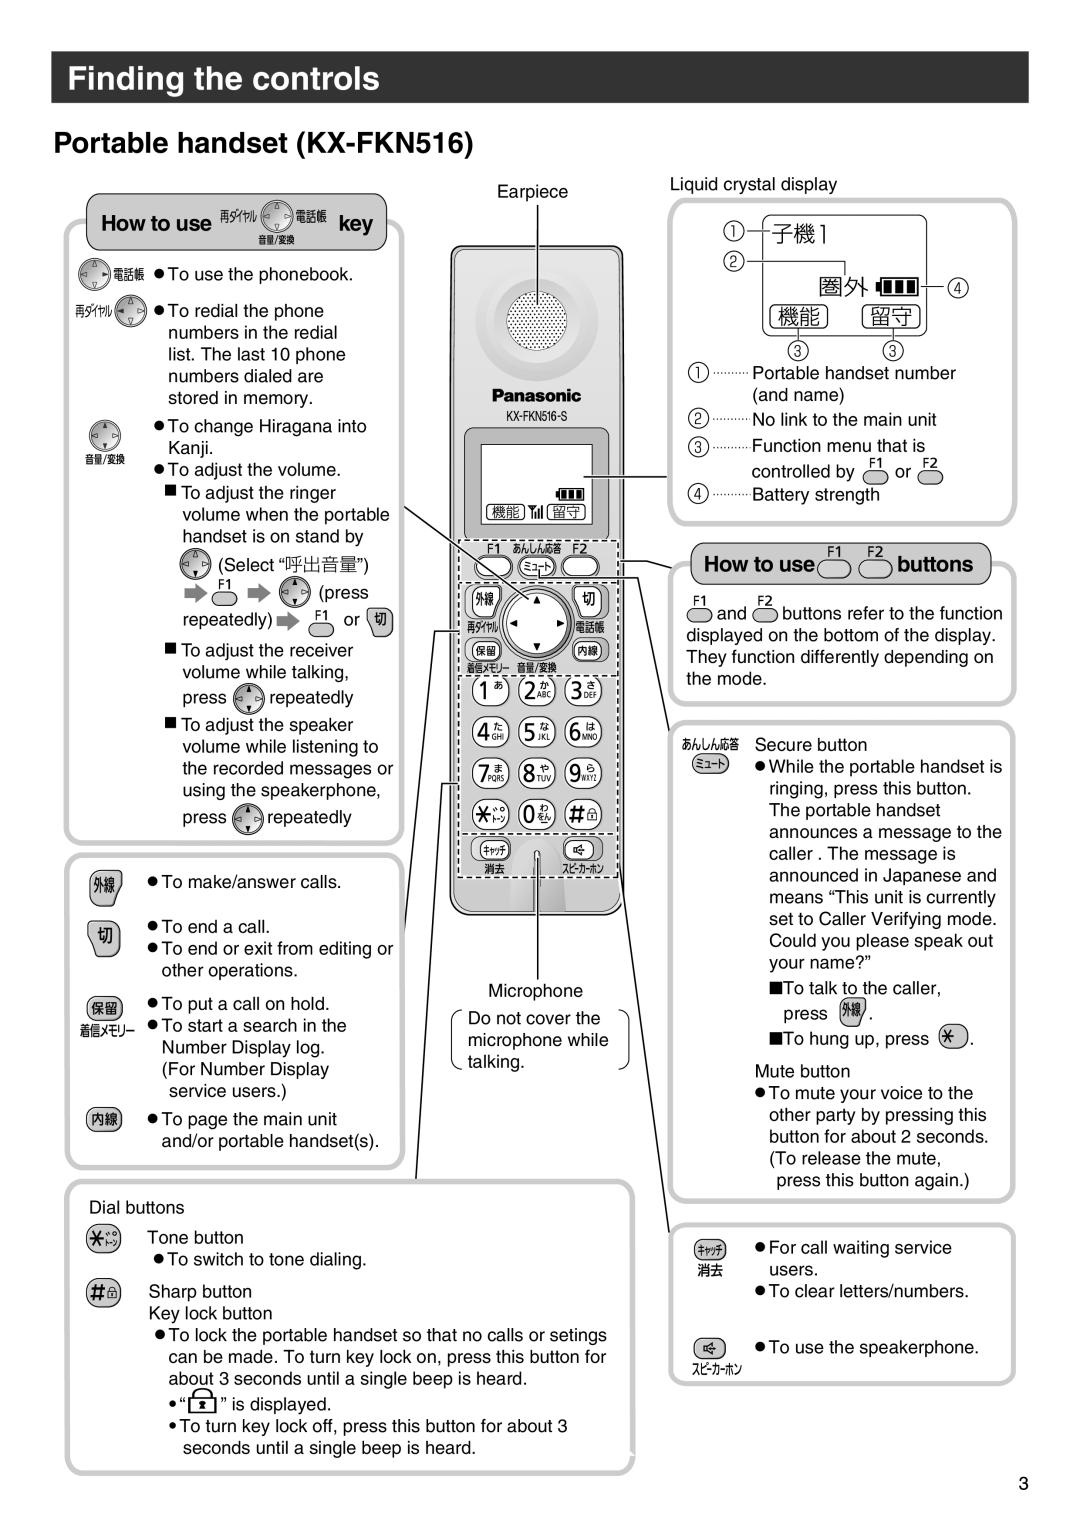 Panasonic KX-PW708DWE5, KX-PW708DLE5 Portable handset KX-FKN516, How to use key, How to use buttons, Finding the controls 